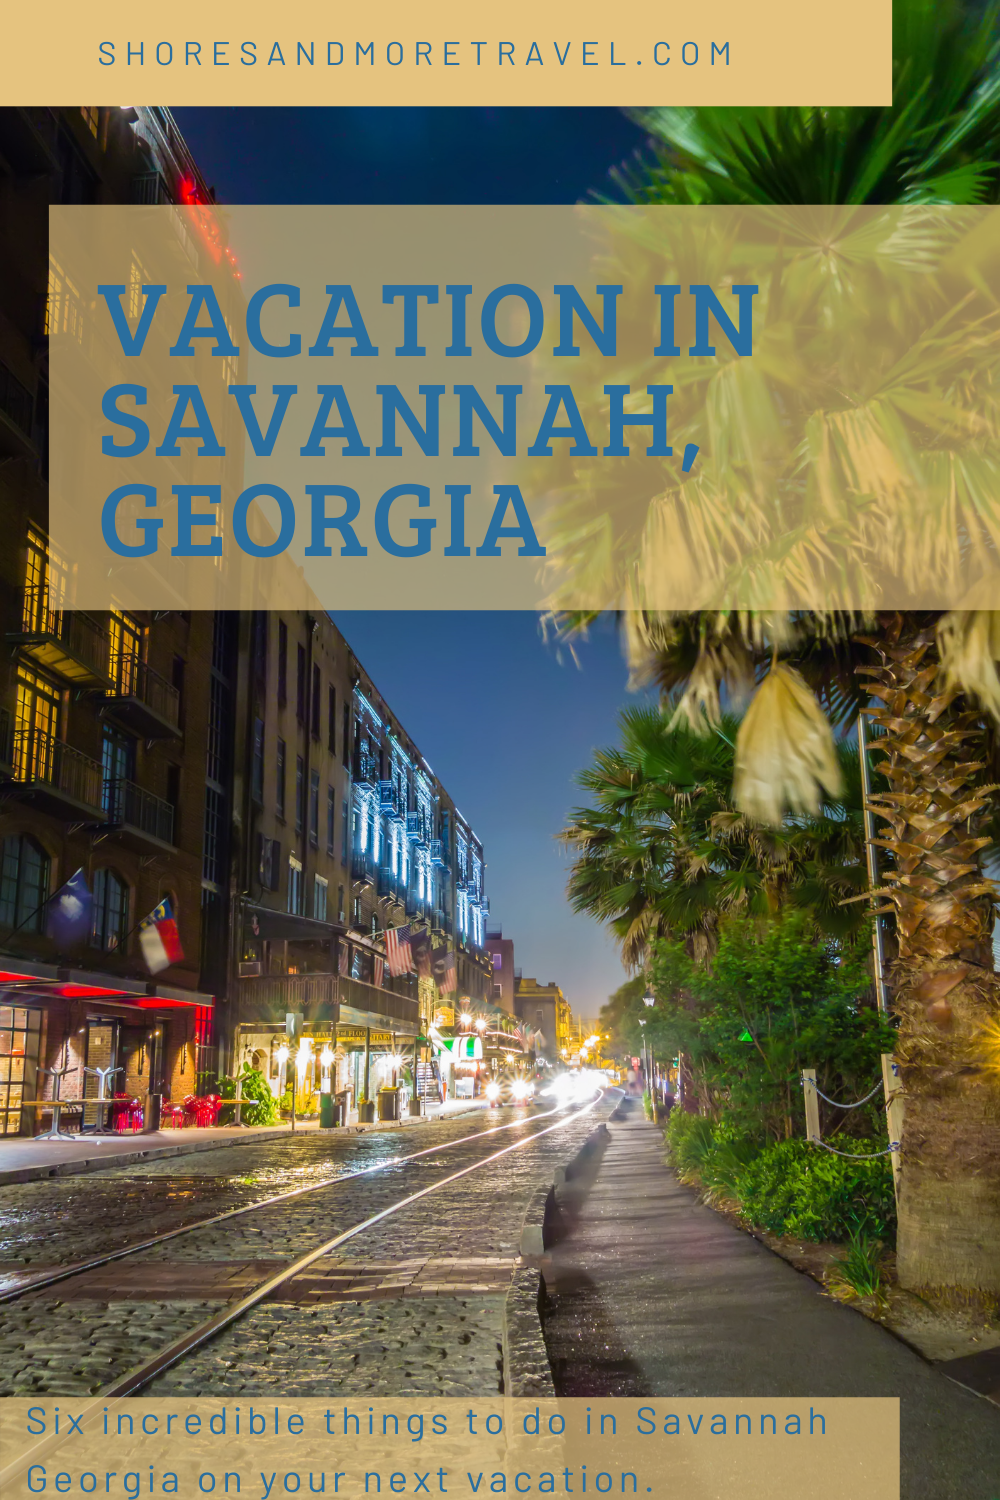 Six of the most incredible attractions in Savannah, Georiga